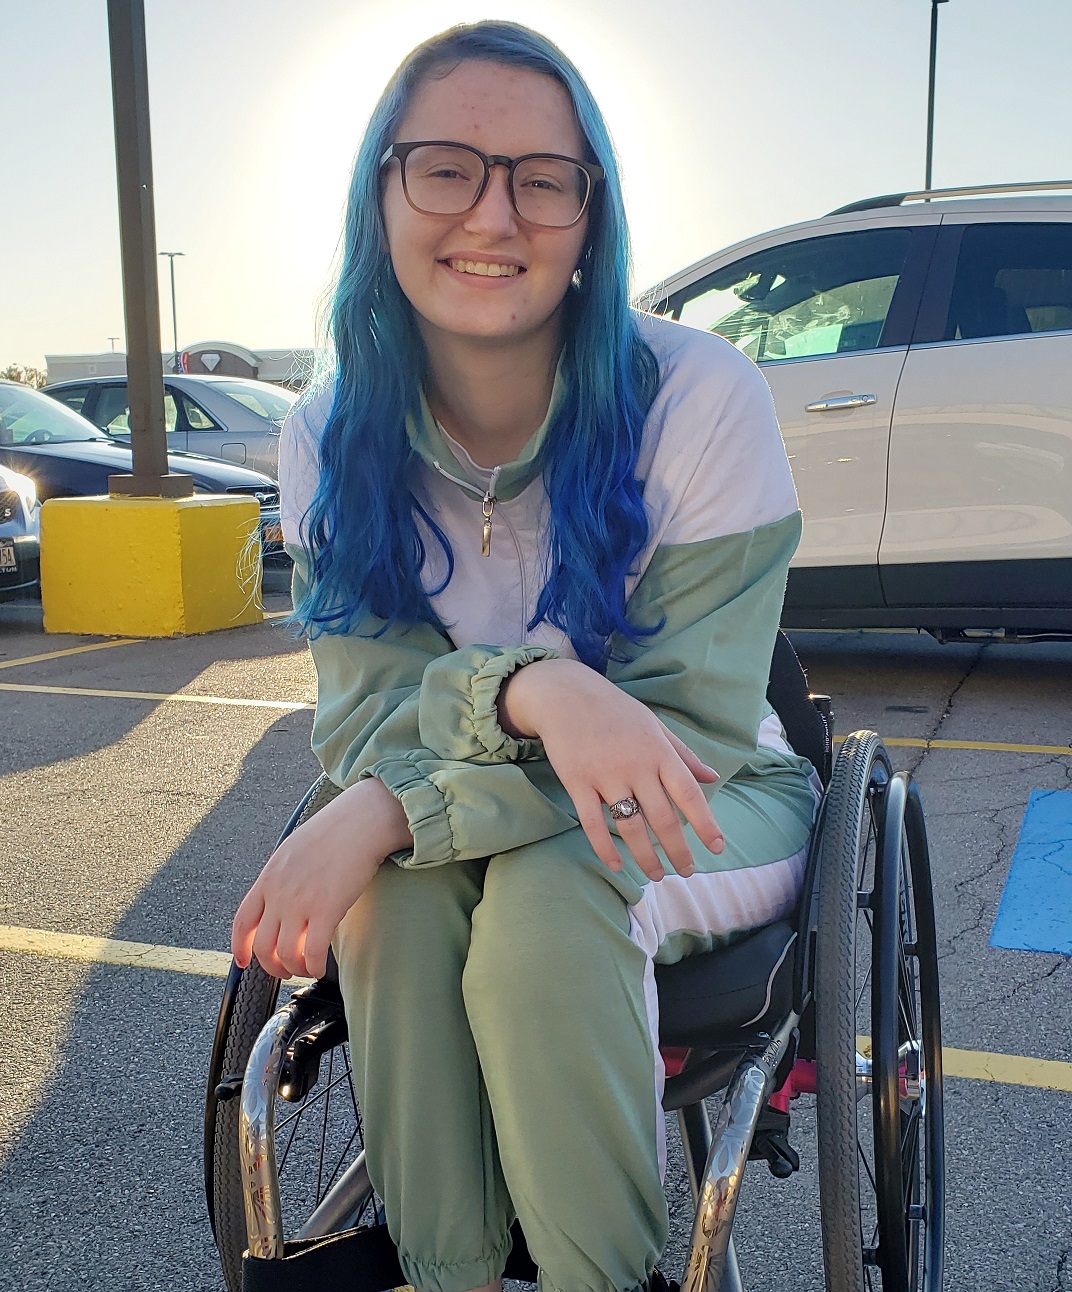 health insurance: smiling woman with blue hair, glasses, wearing white and khaki sports pants, top in wheelchair in parking lot